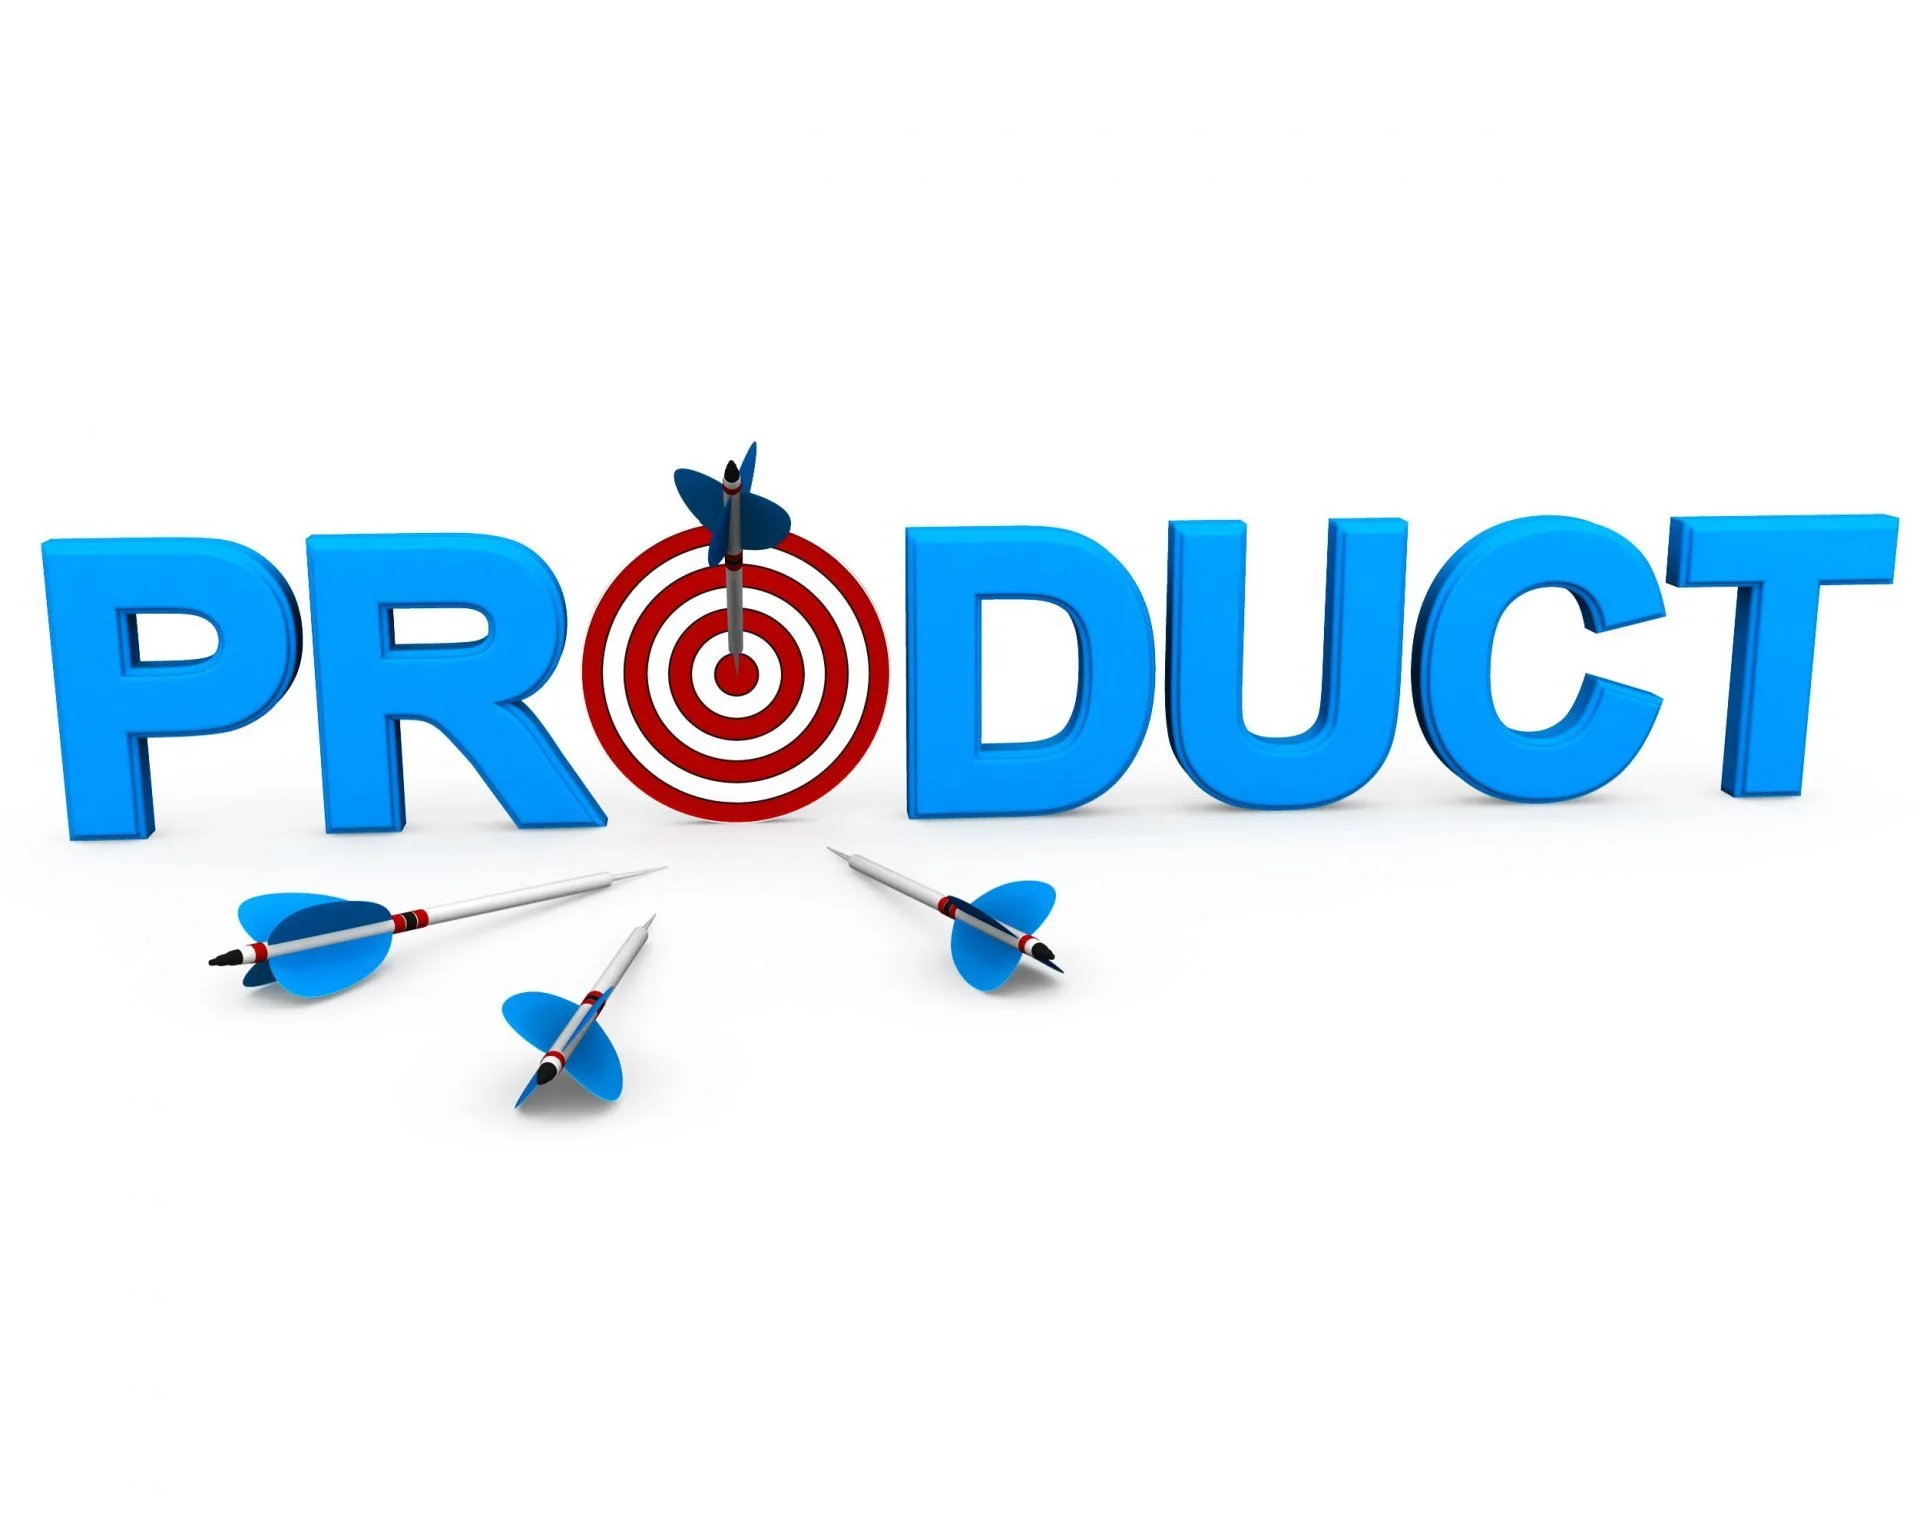 product is one of the important part of principles of marketing 